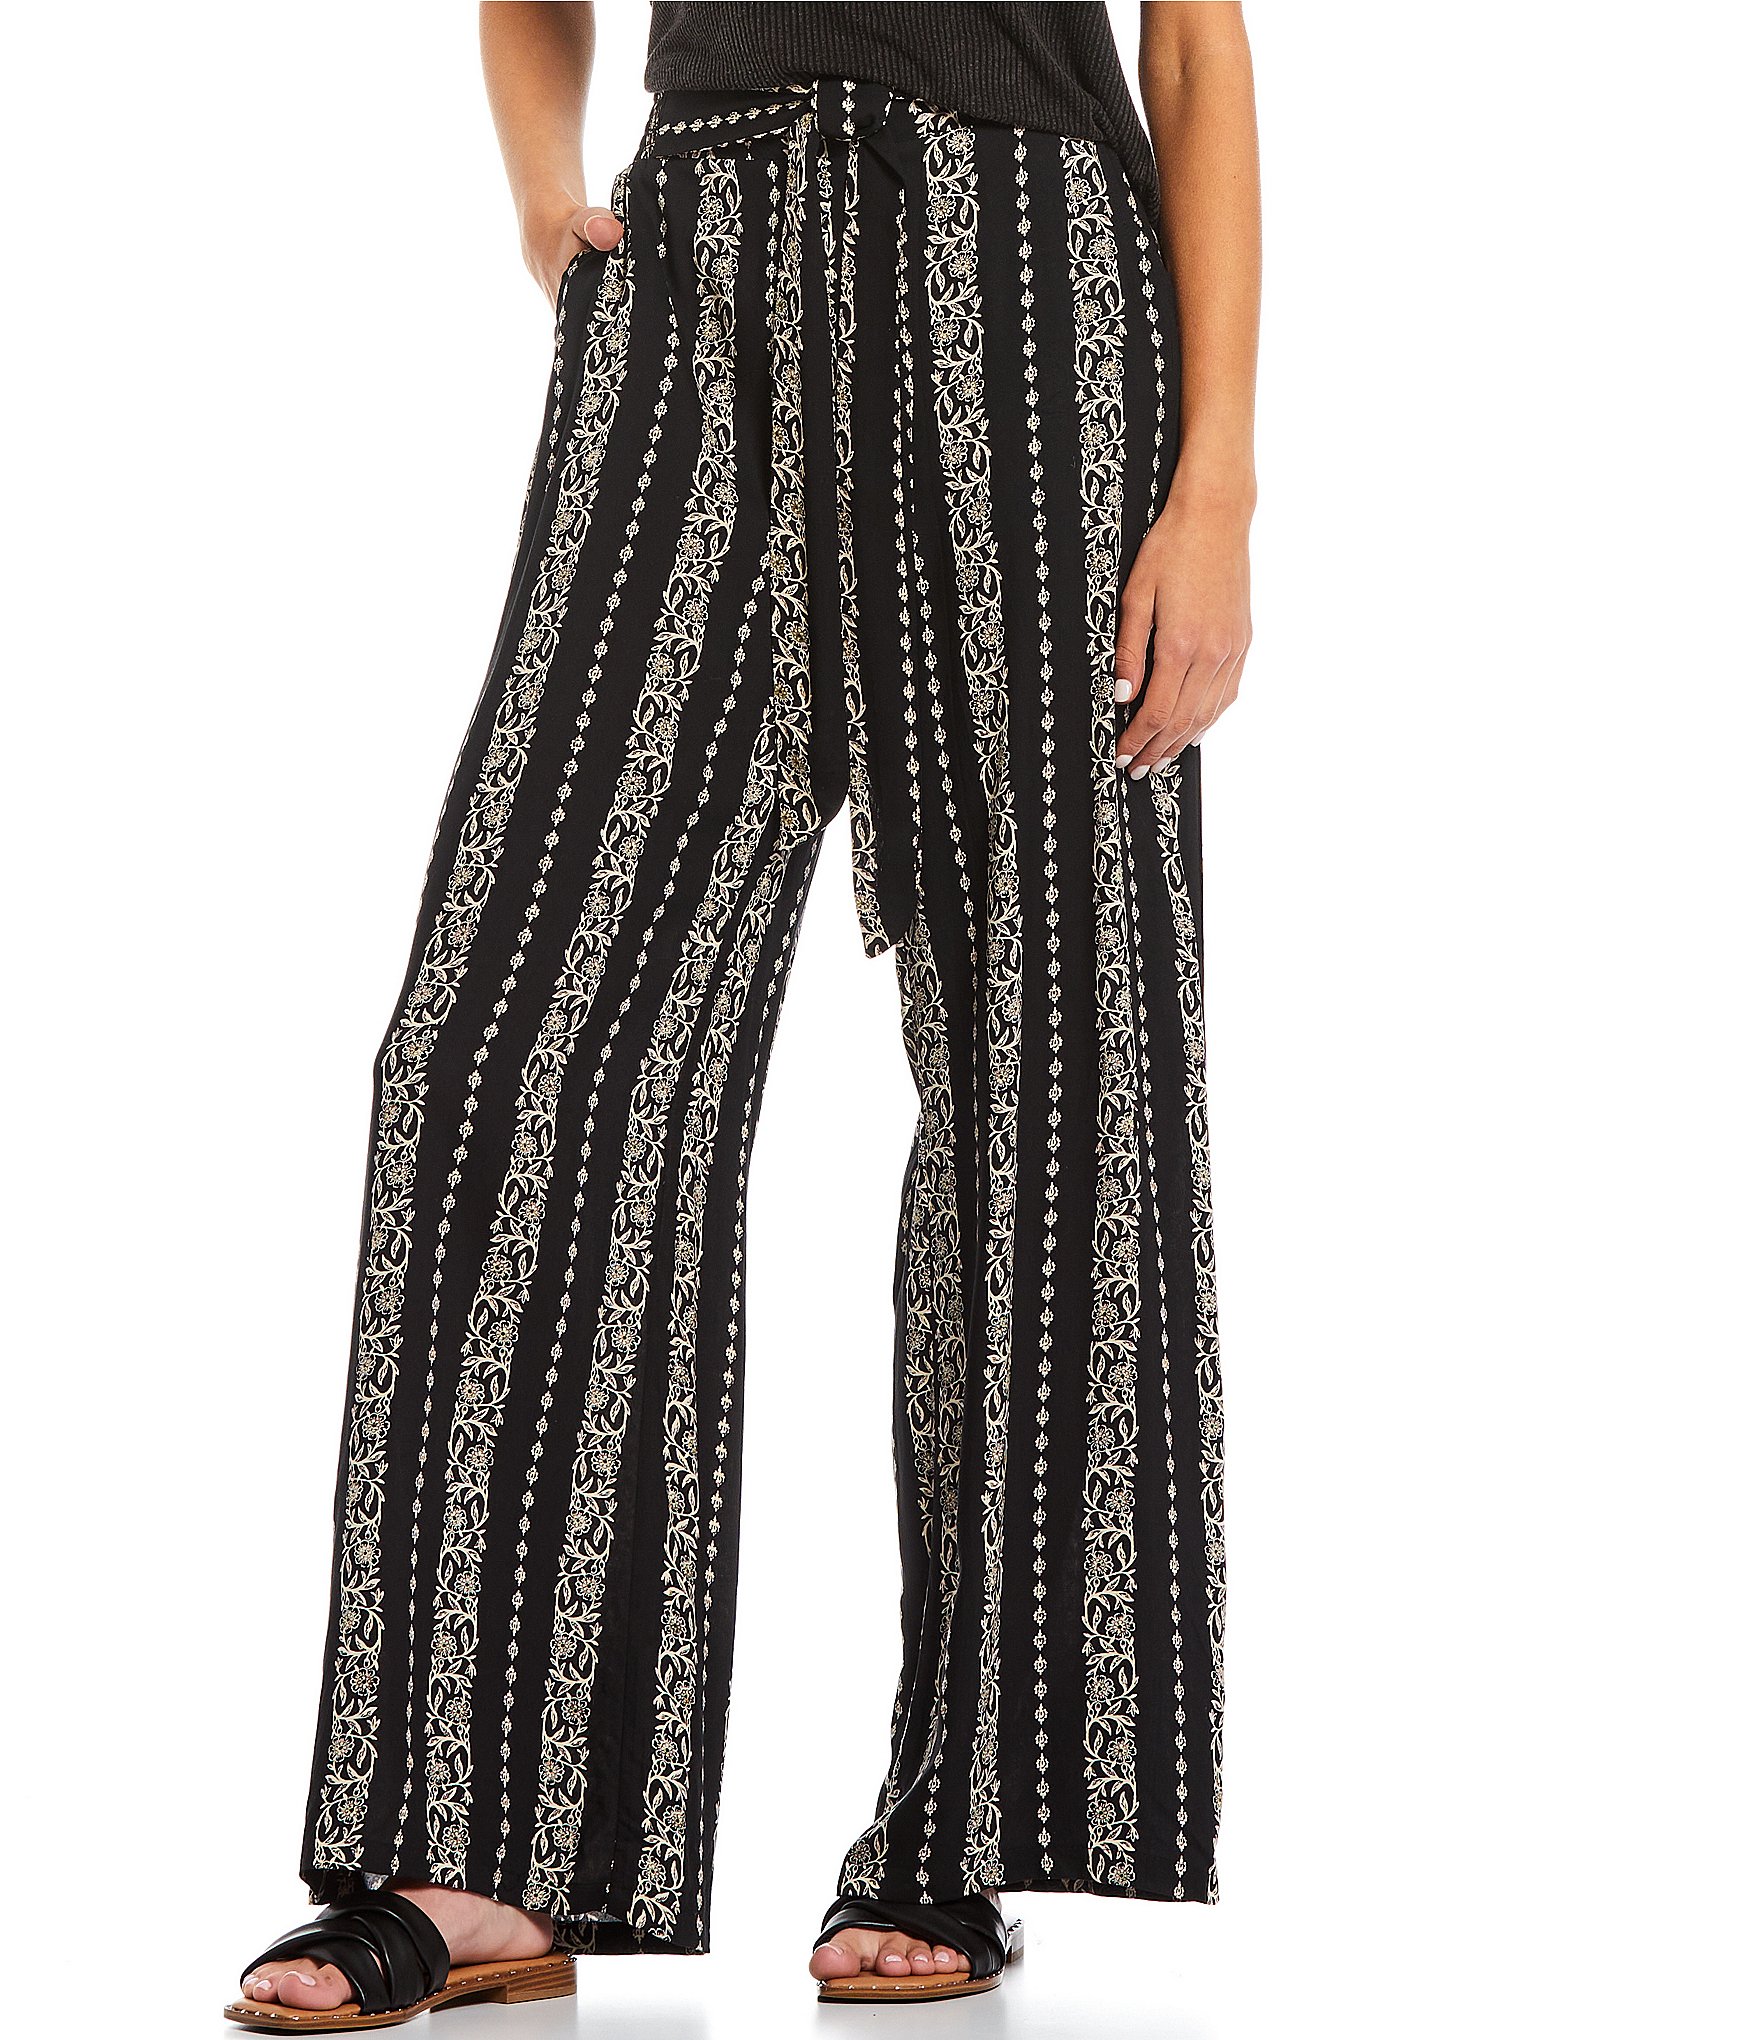 L and L Stuff - Angie Ladies' Wide Leg Pants With Waist Tie